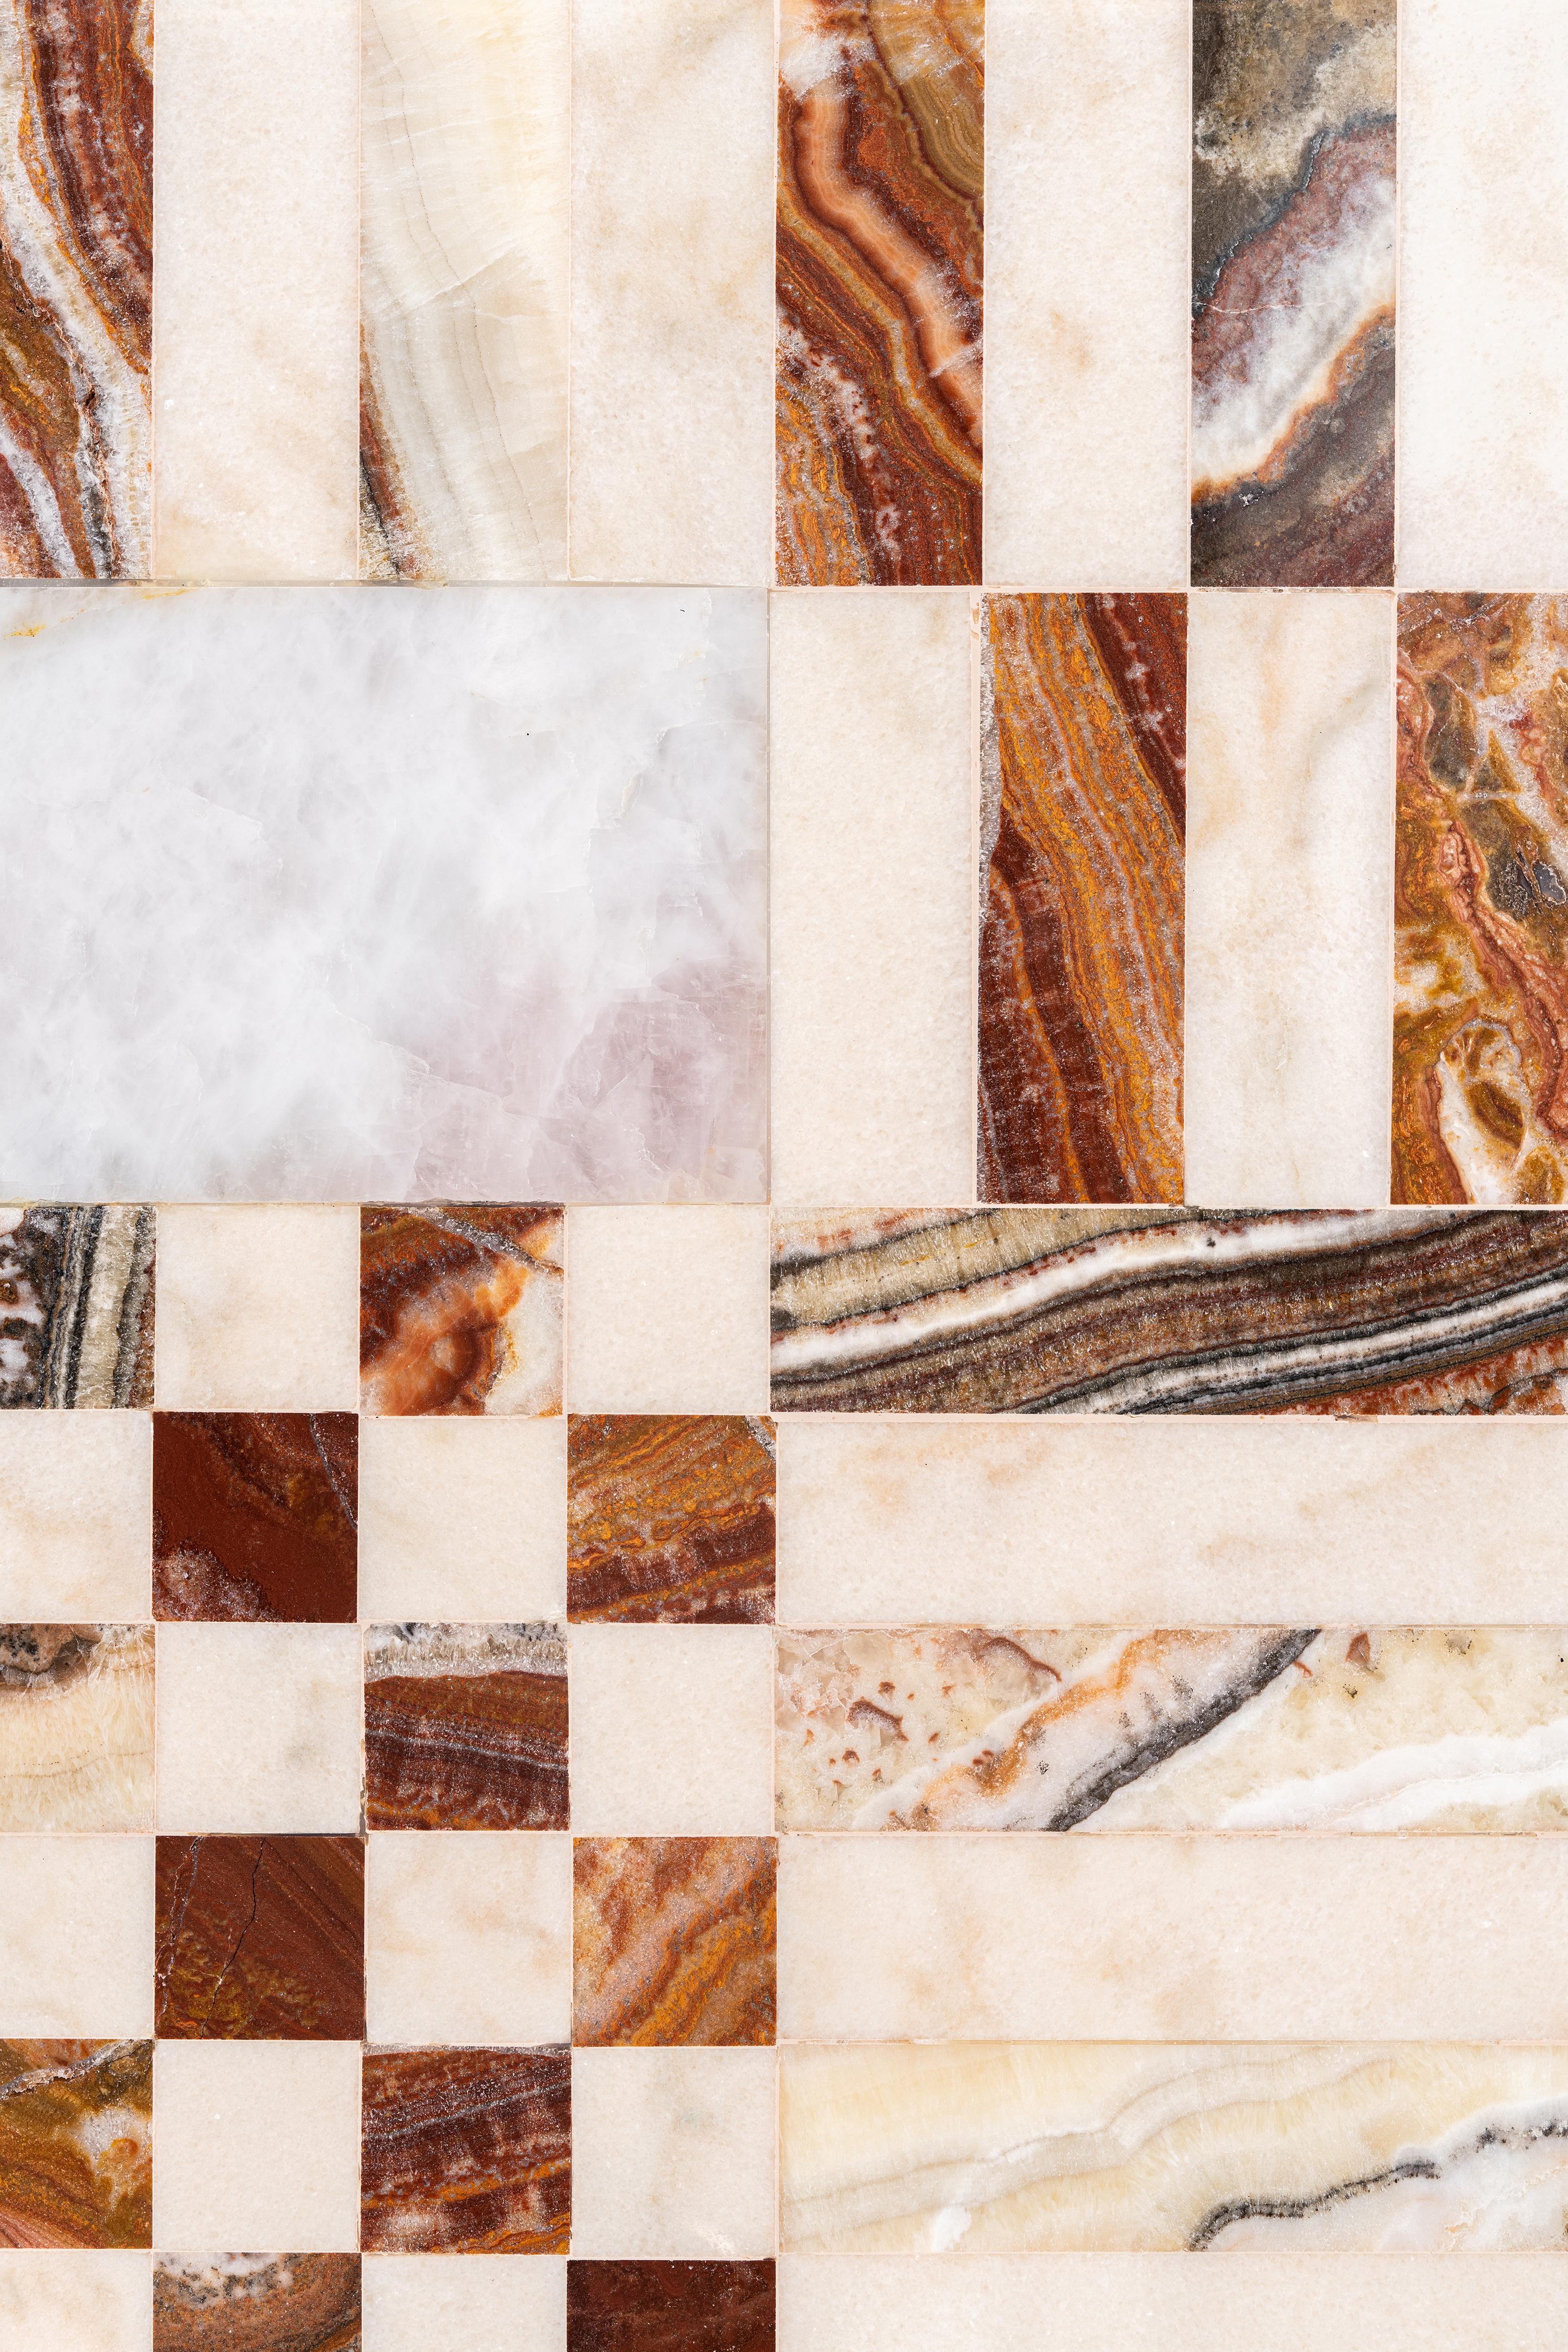 A playful and graphic layering of marble patterns that utmost depict the ALTIS aesthetics. Hues of blushes and burgundies are reflected amidst the marbles, hand-woven cotton and copper that comprise the perfect union of materiality. This